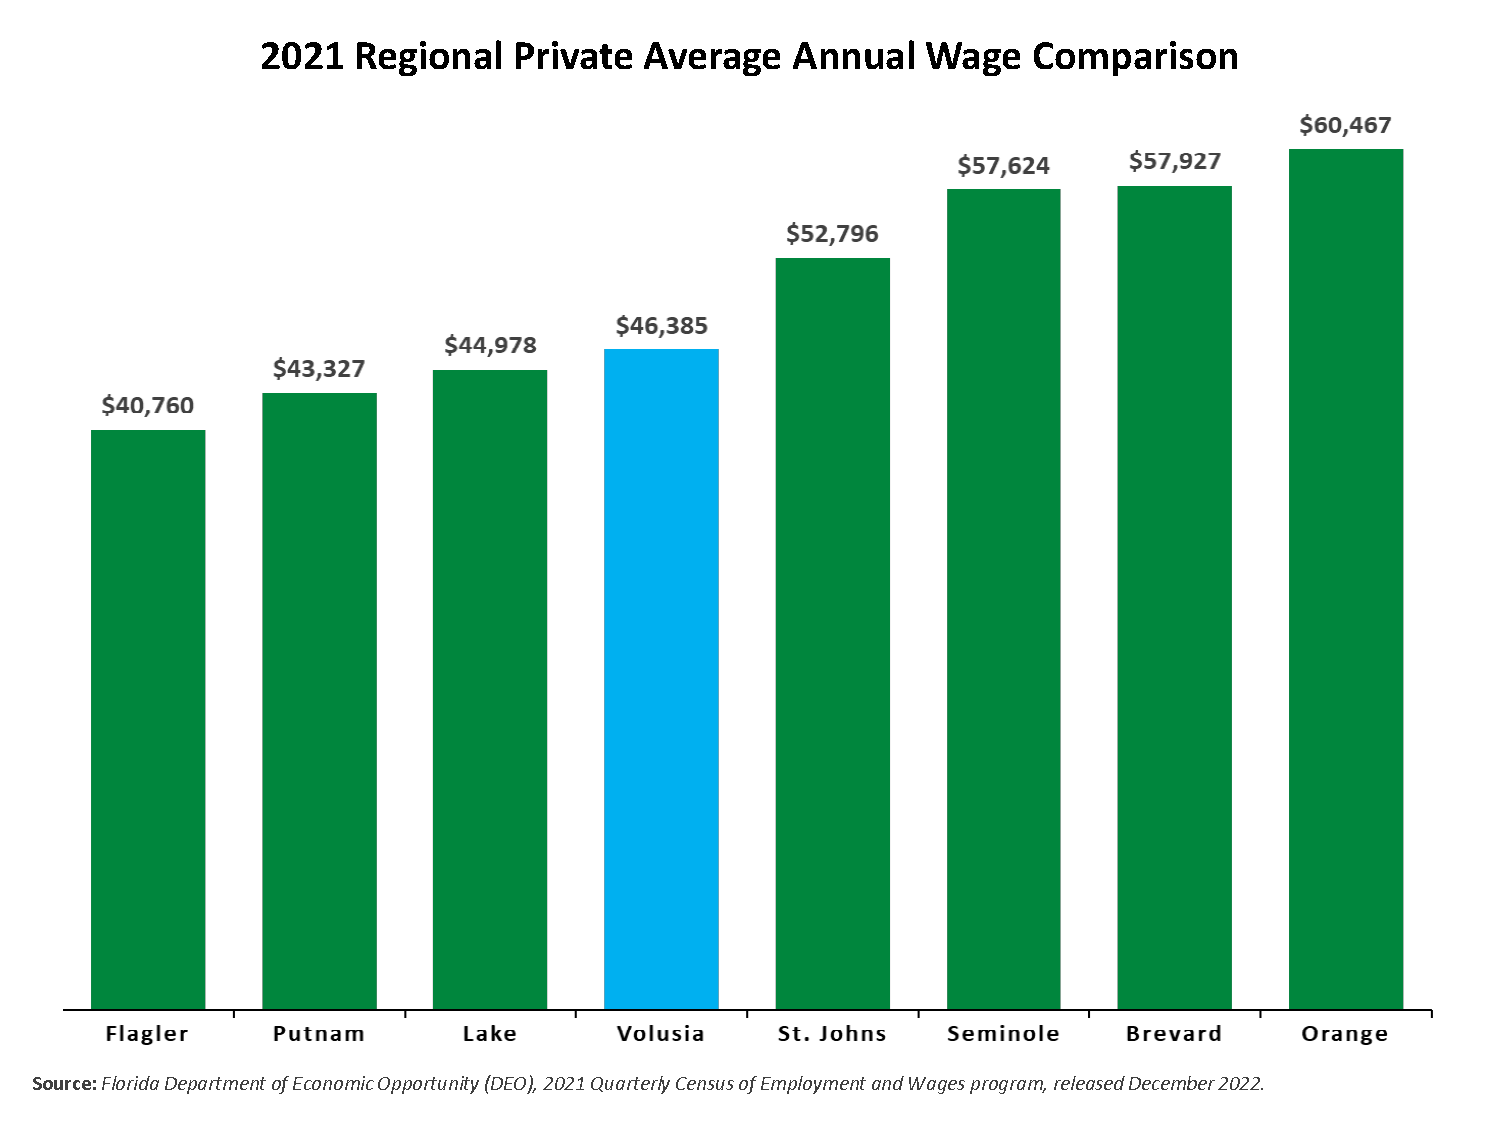 Volusia County’s average wage ranks 32th out of 67 counties. The chart shows 2021 regional counties Private Average Annual wages and percent change from 2020 in comparison to Volusia County. Flagler - $40,760 increase of 10.0%. Putnam - $43,327 increase of 3.6%. Lake - $44,978, increase of 8.4%. Volusia $46,385, increase of 6.2%. St. Johns - $52,796 increase of 7.6%. Seminole - $57,624 increase of 6.3%. Brevard $57,927 increase of 4.7%. Orange - $60,467 increase of 7.3%.